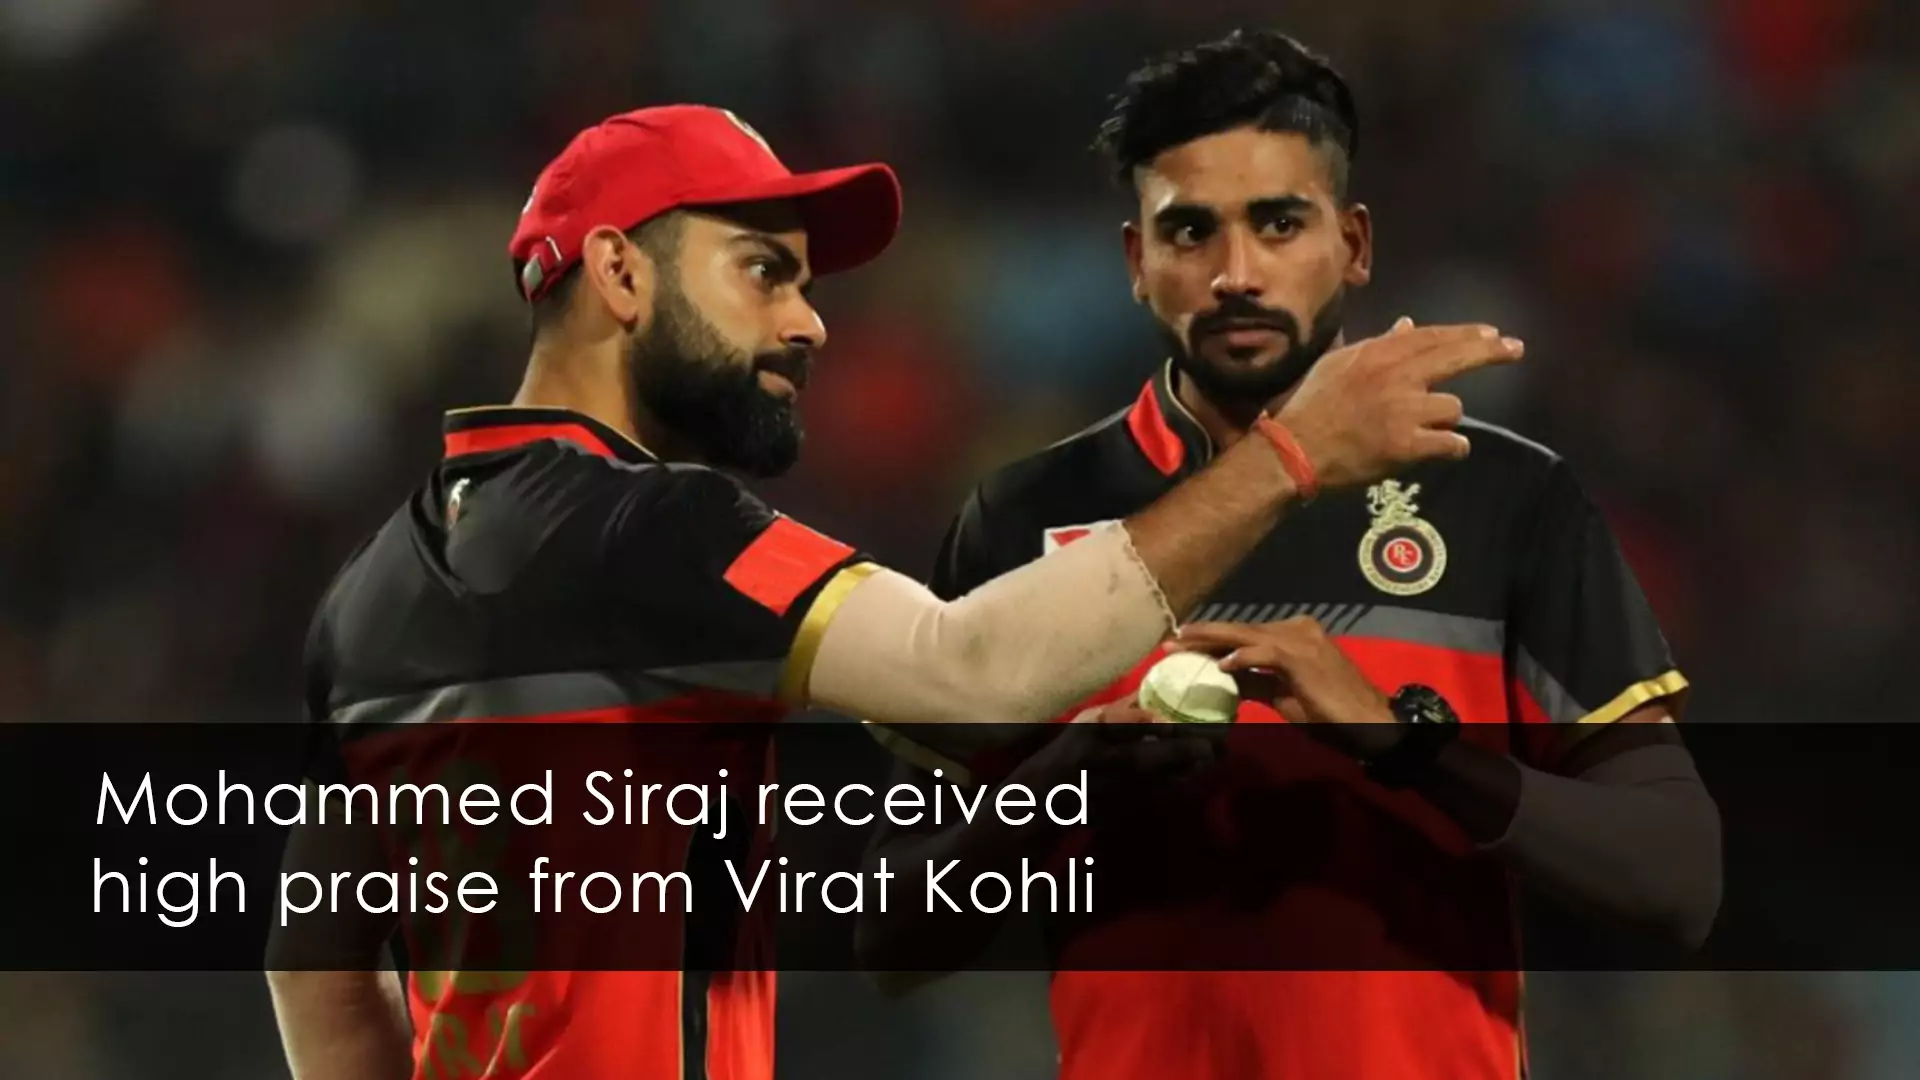 Mohammed Siraj got high praise from Virat Kohli for his playing during Test Series between India and England.